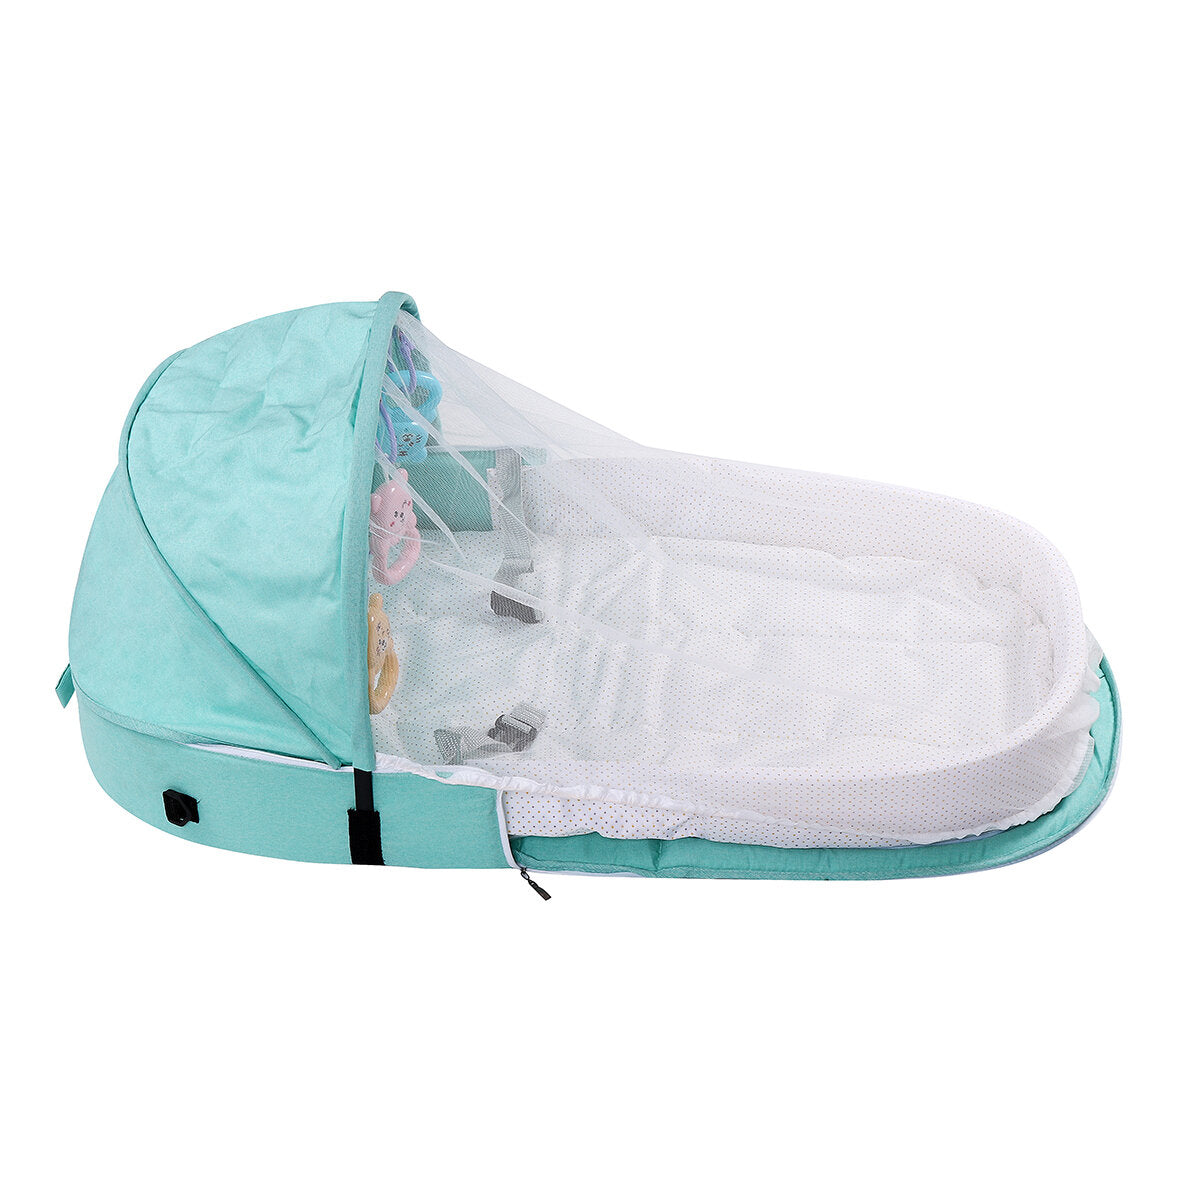 2-in-1 Folding Baby Sleeping Bed Lounger Travel Infant Bed with Mosquito Net